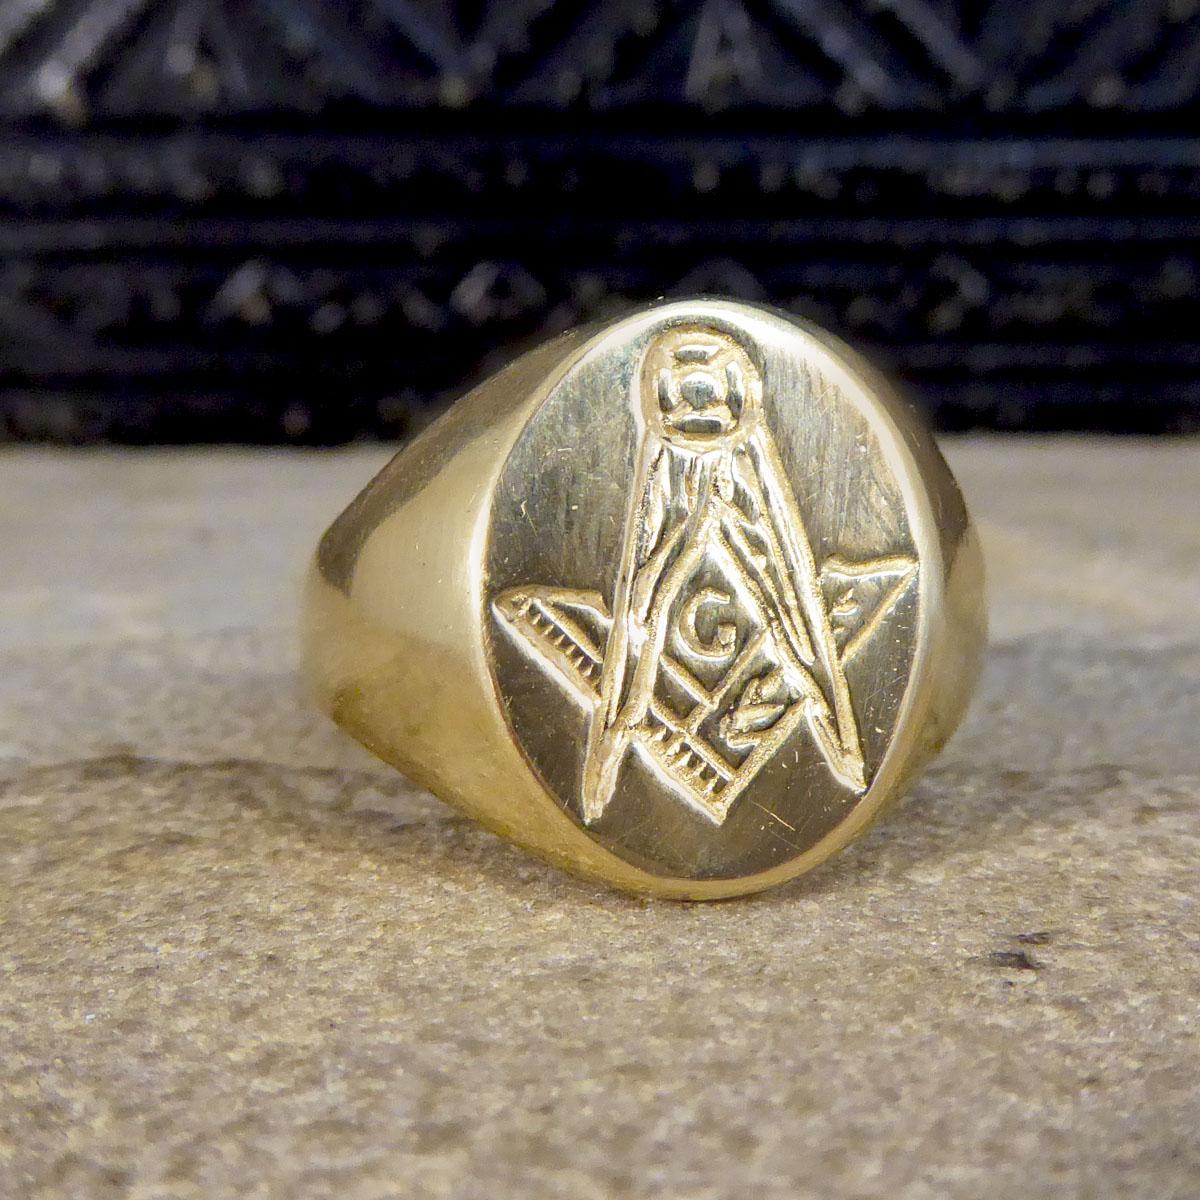 This vintage ring it typically worn by men as a gents signet but can also be worn my women as a unisex piece. This signet ring features a Masonic Compass engraving on the oval face and is quite large in size fully crafted from 9ct Yellow Gold.

Ring